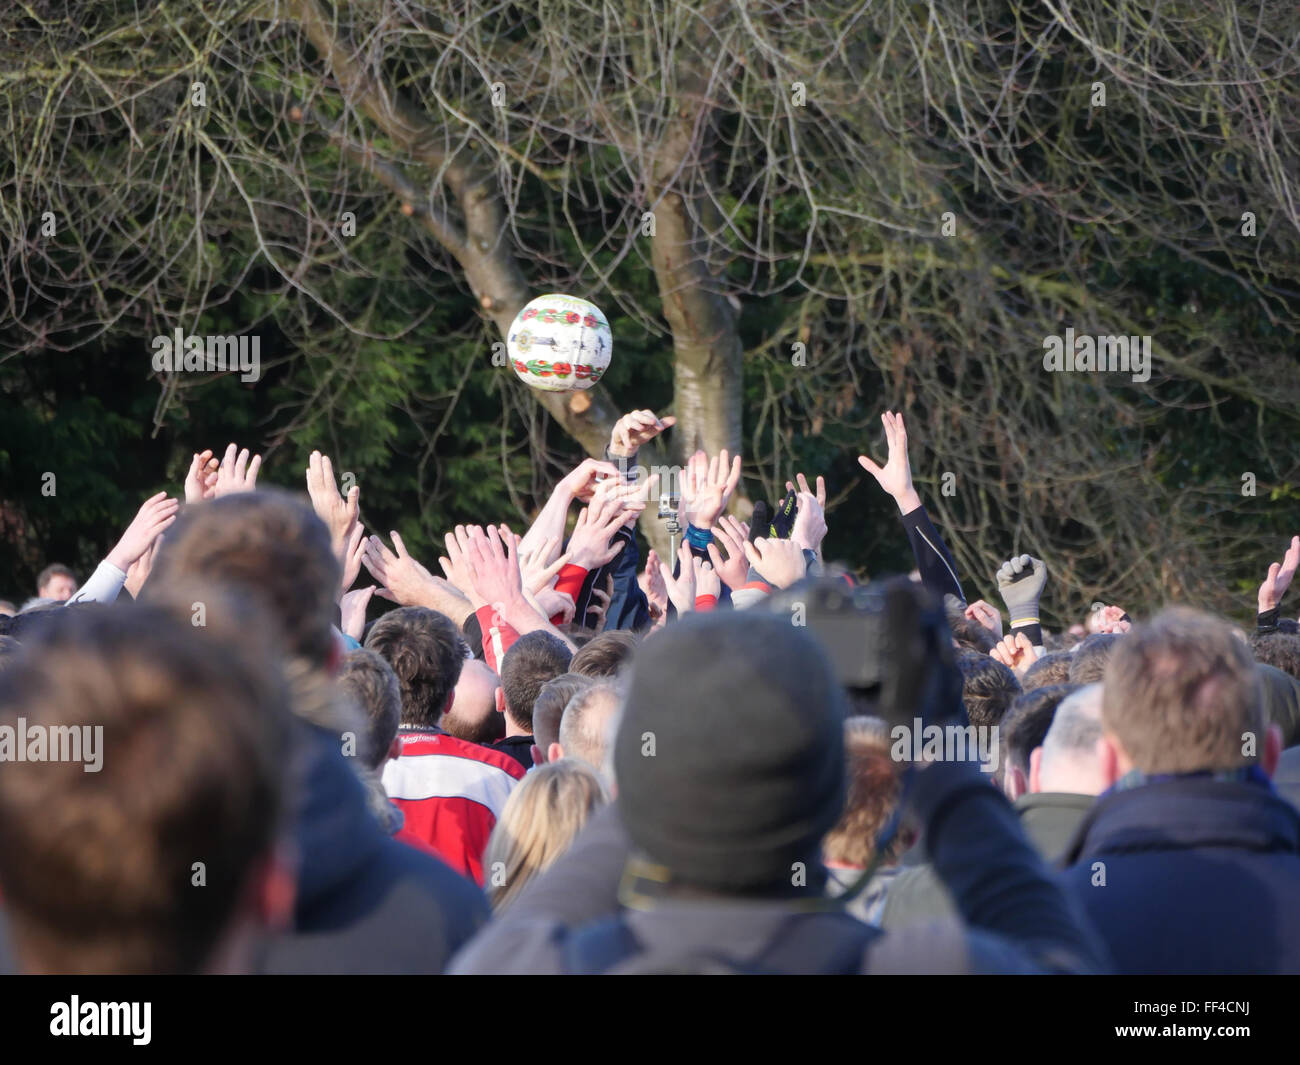 Ashbourne, Derbyshire, UK. 10th February, 2016. Ash Wednesday football match witch is the second day of the Royal Shrovetide Football match in Ashbourne, Derbyshire 2016 The Royal Shrovetide Football features the unconventional football game that is played over two eight hour periods on shrovetide Tuesday & Ash Wednesday. The goal posts 3 miles apart in the river which separated the Northern & Southern half of the Derbyshire town. Credit:  Doug Blane/Alamy Live News Stock Photo